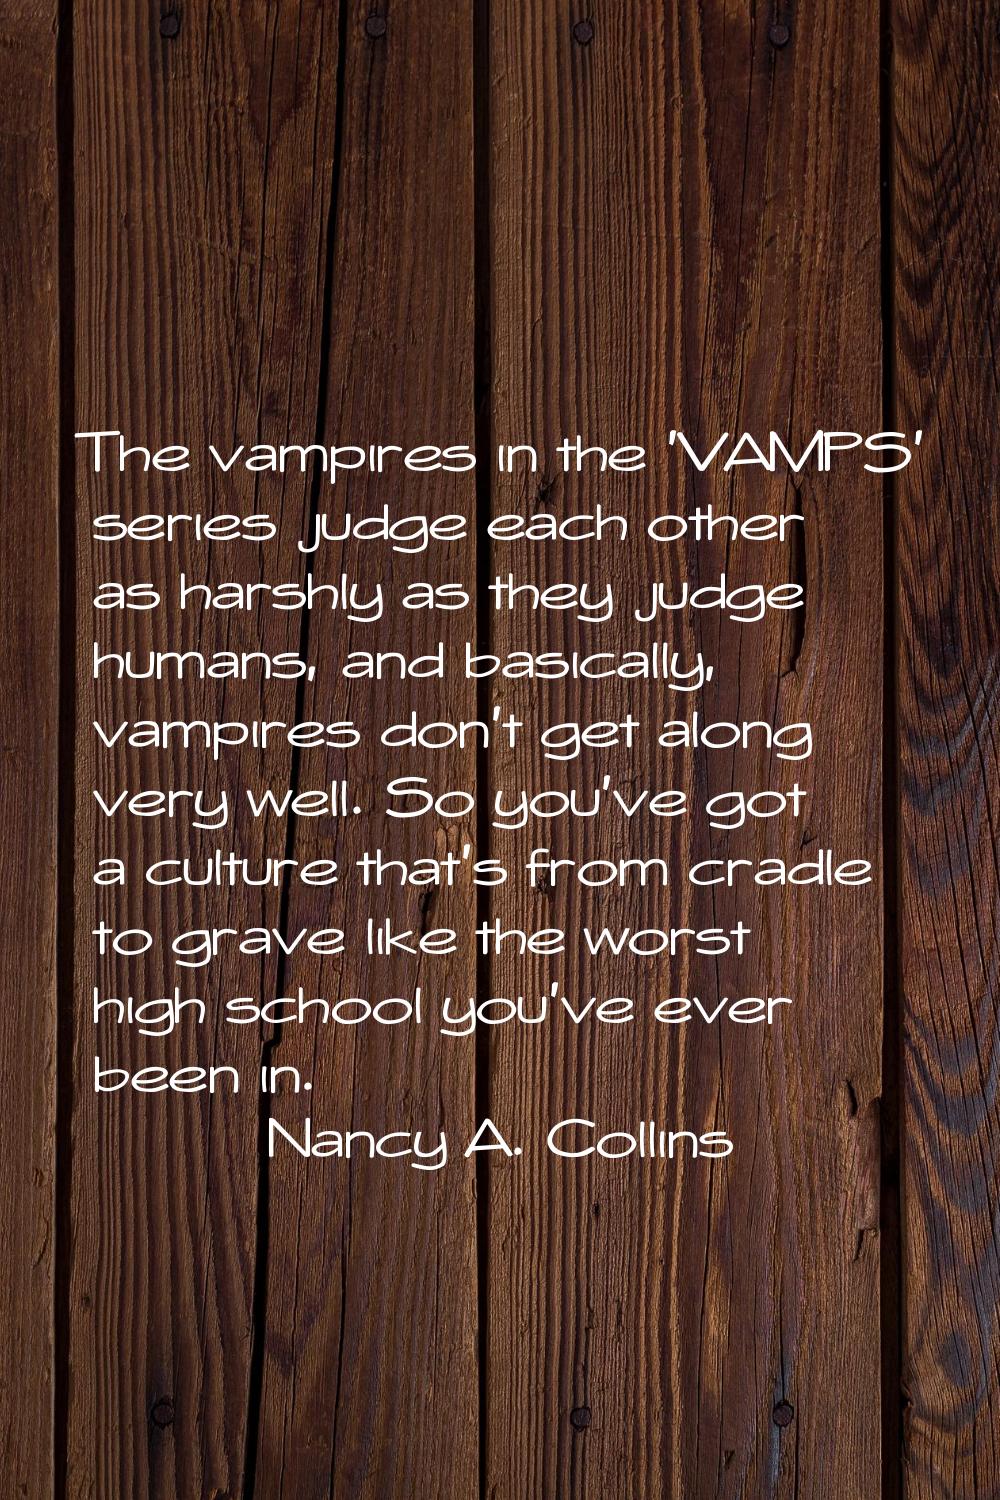 The vampires in the 'VAMPS' series judge each other as harshly as they judge humans, and basically,